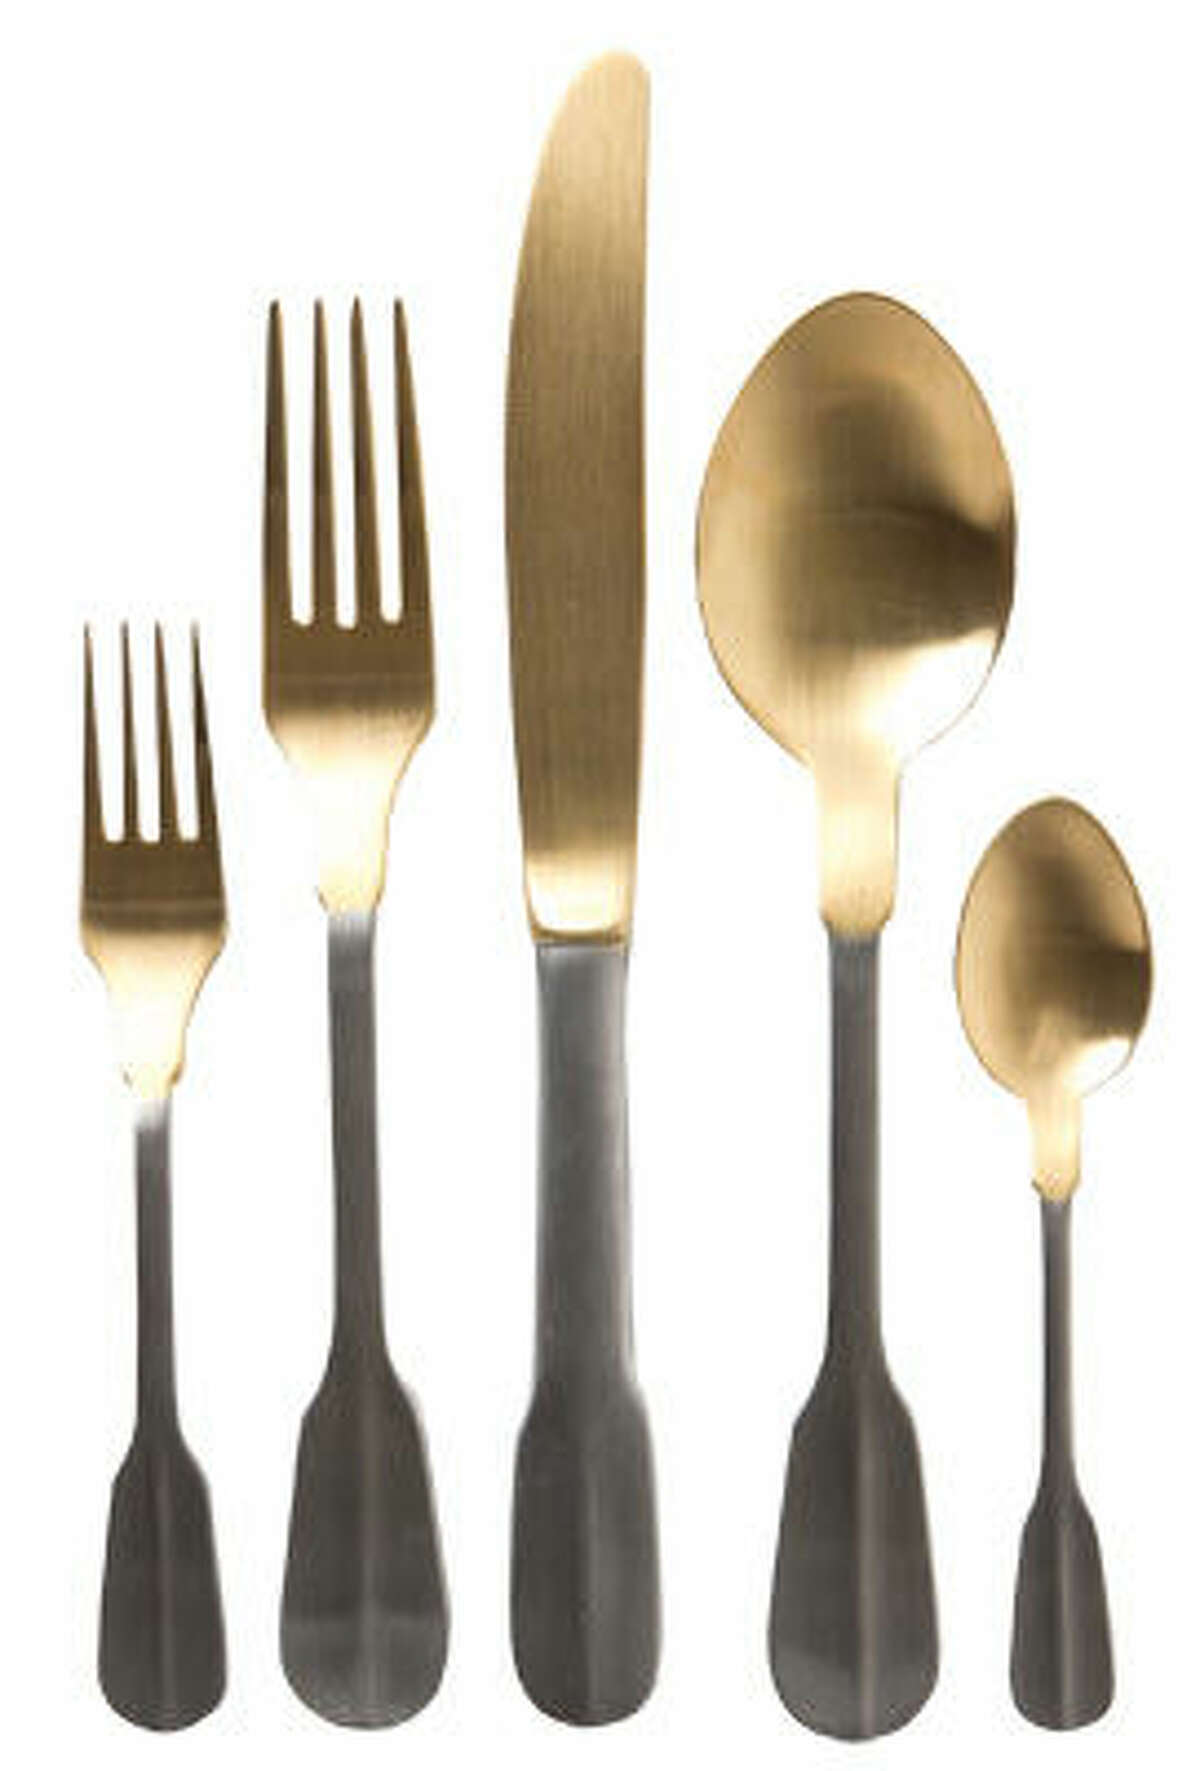 Gold-tipped flatware with 24K gold plate, $38 for five-piece place setting, at Anthropologie, Westfarms, Farmington, 860/521-3766, anthropologie.com.